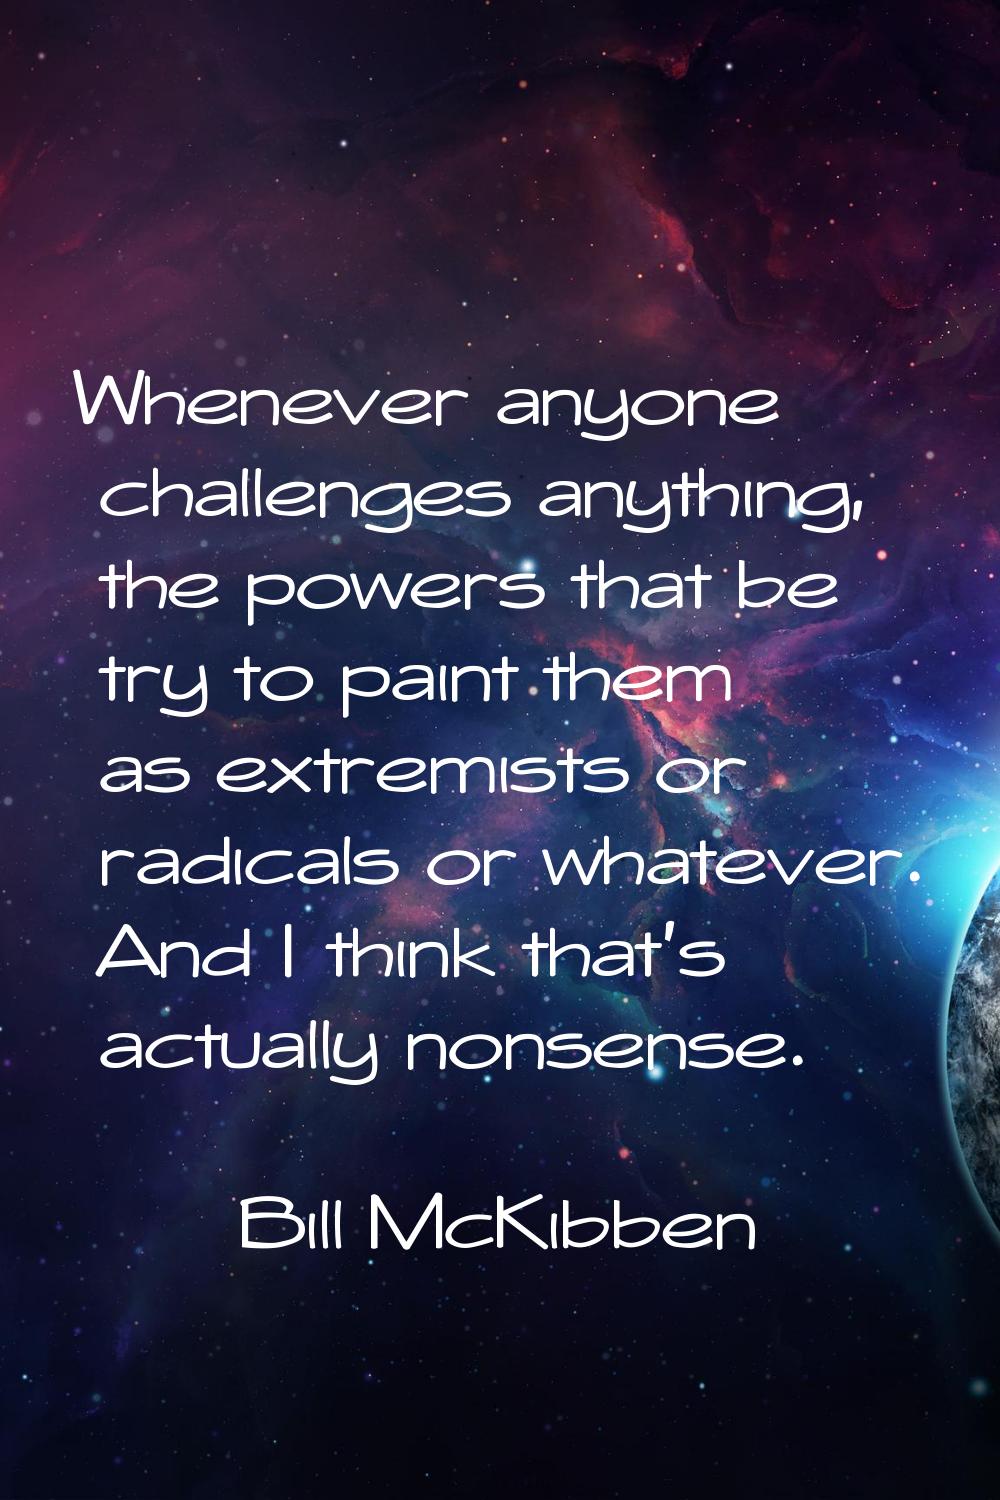 Whenever anyone challenges anything, the powers that be try to paint them as extremists or radicals